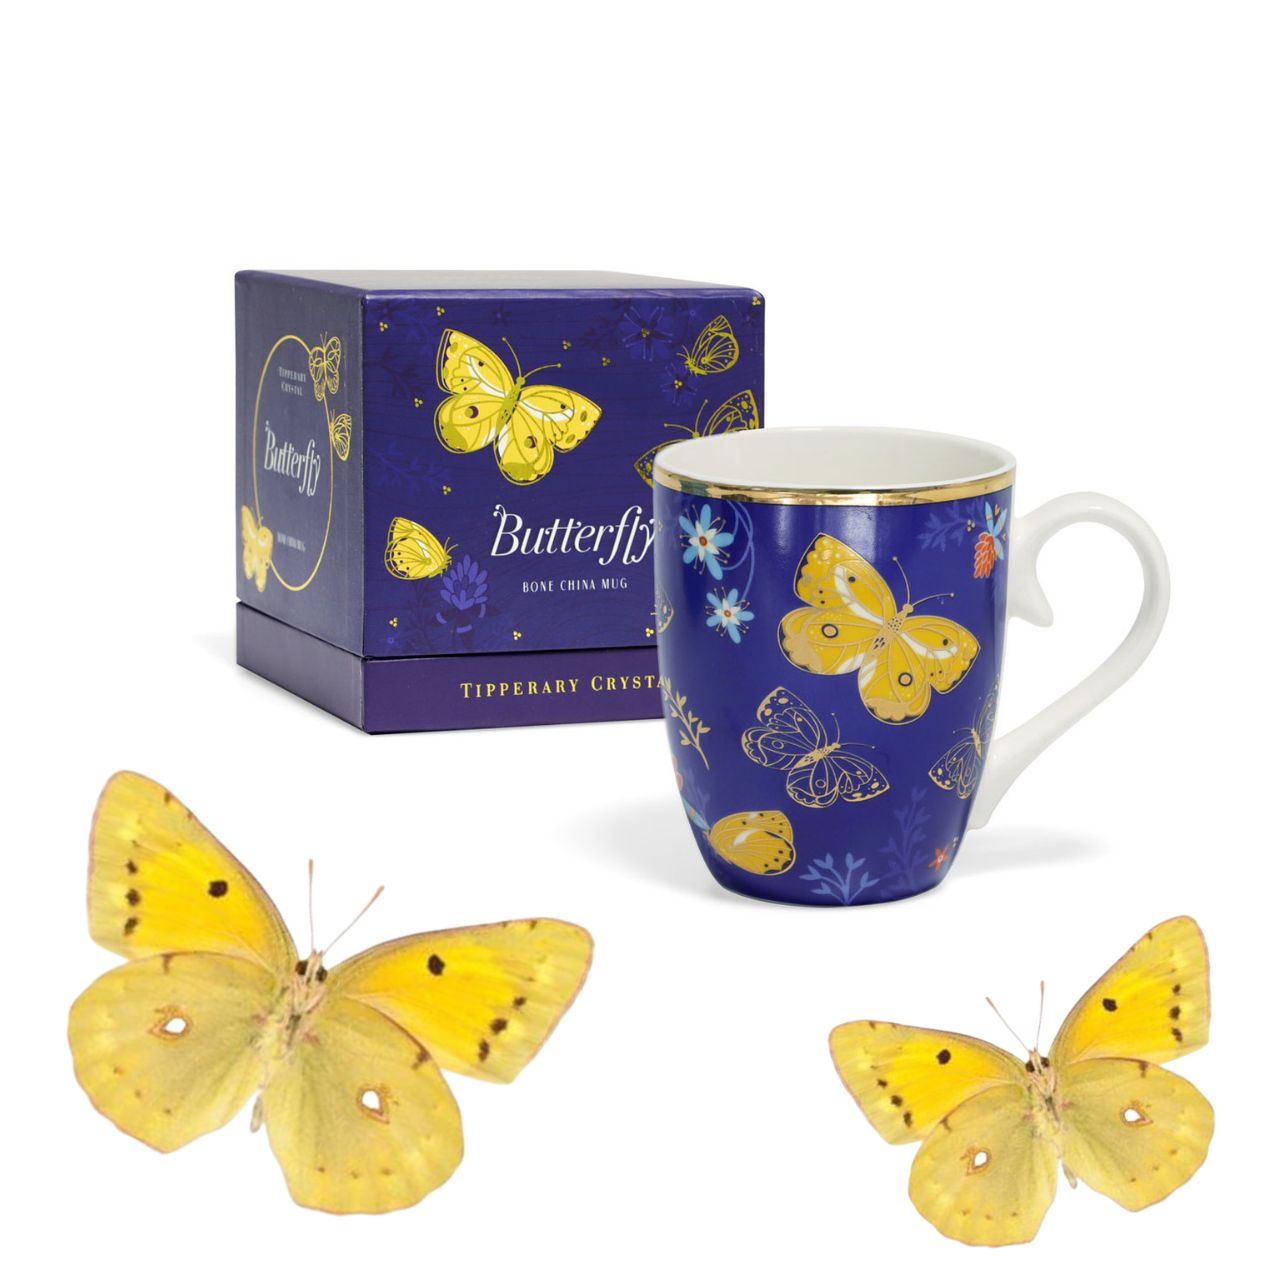 Tipperary Crystal Single Butterfly Mug - The Clouded Yellow  Drawing inspiration from urban garden, the Tipperary Crystal Butterfly collection transforms an icon into something modern and unexpected. Playful and elegant, this collection draws from the inherent beauty of the butterfly.